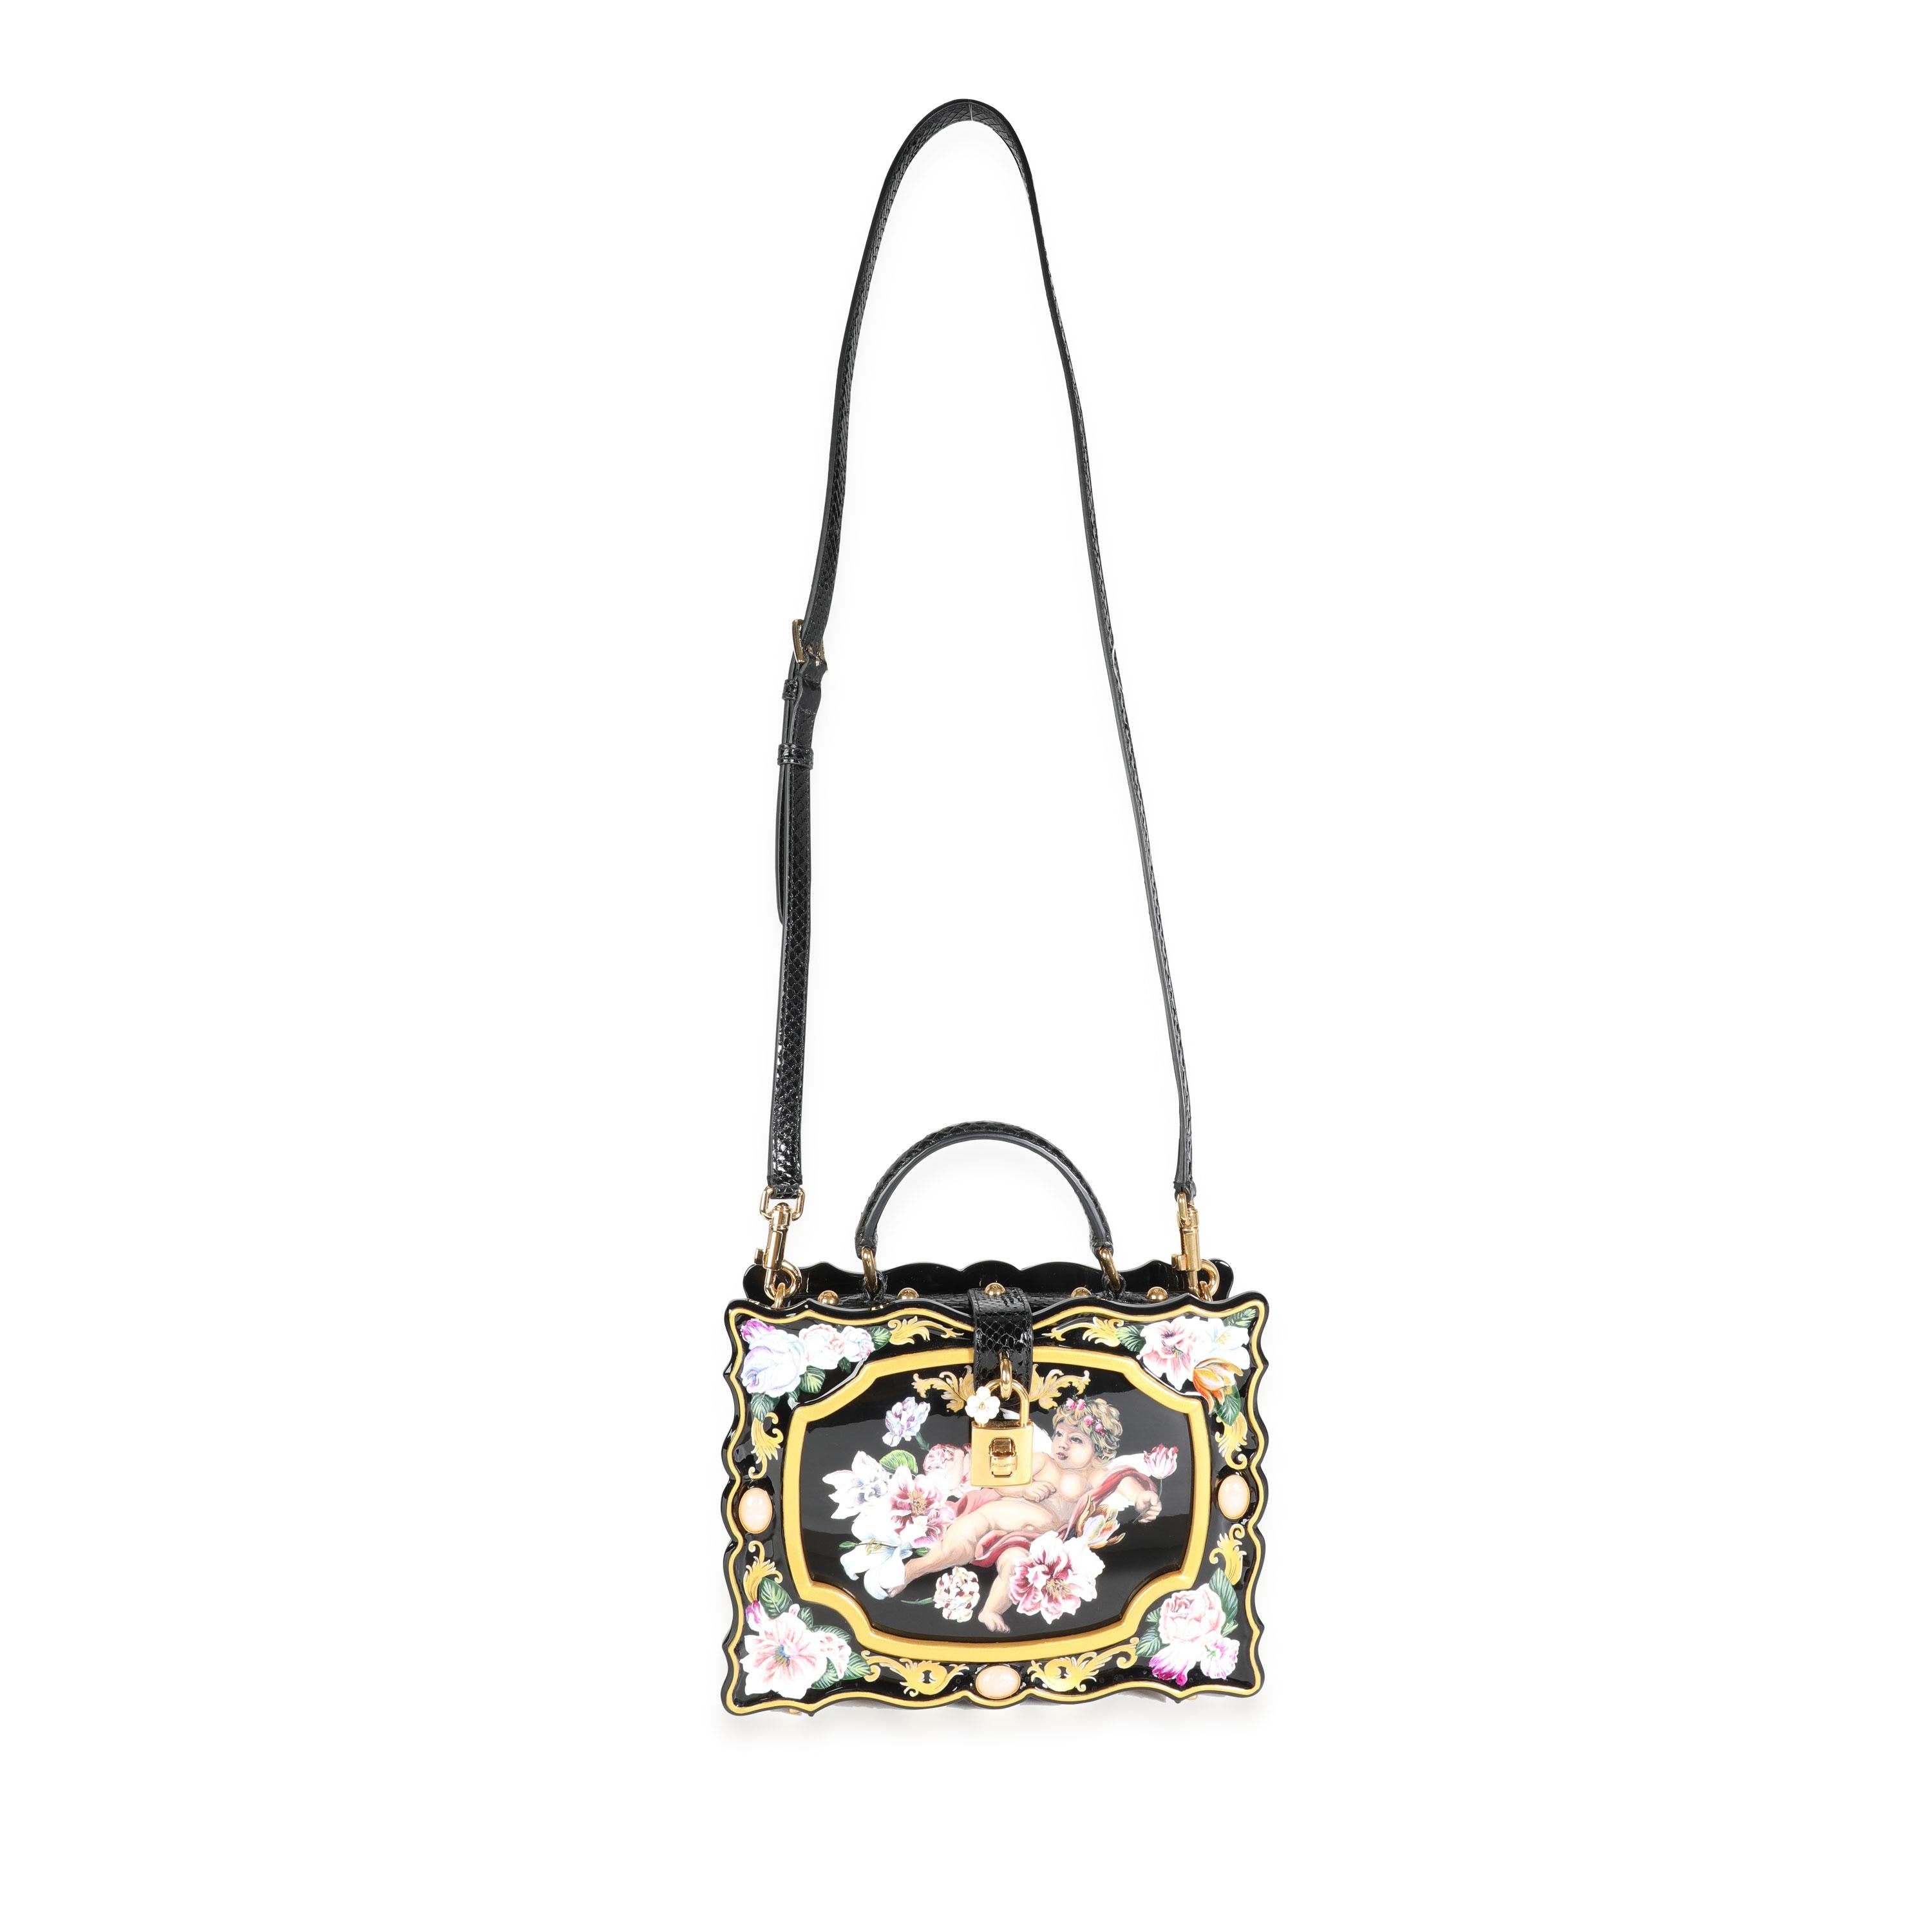 Listing Title: Dolce & Gabbana Hand Painted Wooden Cherub Box Bag with Snakeskin Strap
SKU: 115754
MSRP: 6645.00
Condition: Pre-owned (3000)
Condition Description: This piece speaks for itself. A true piece of functional art. Get it here now while